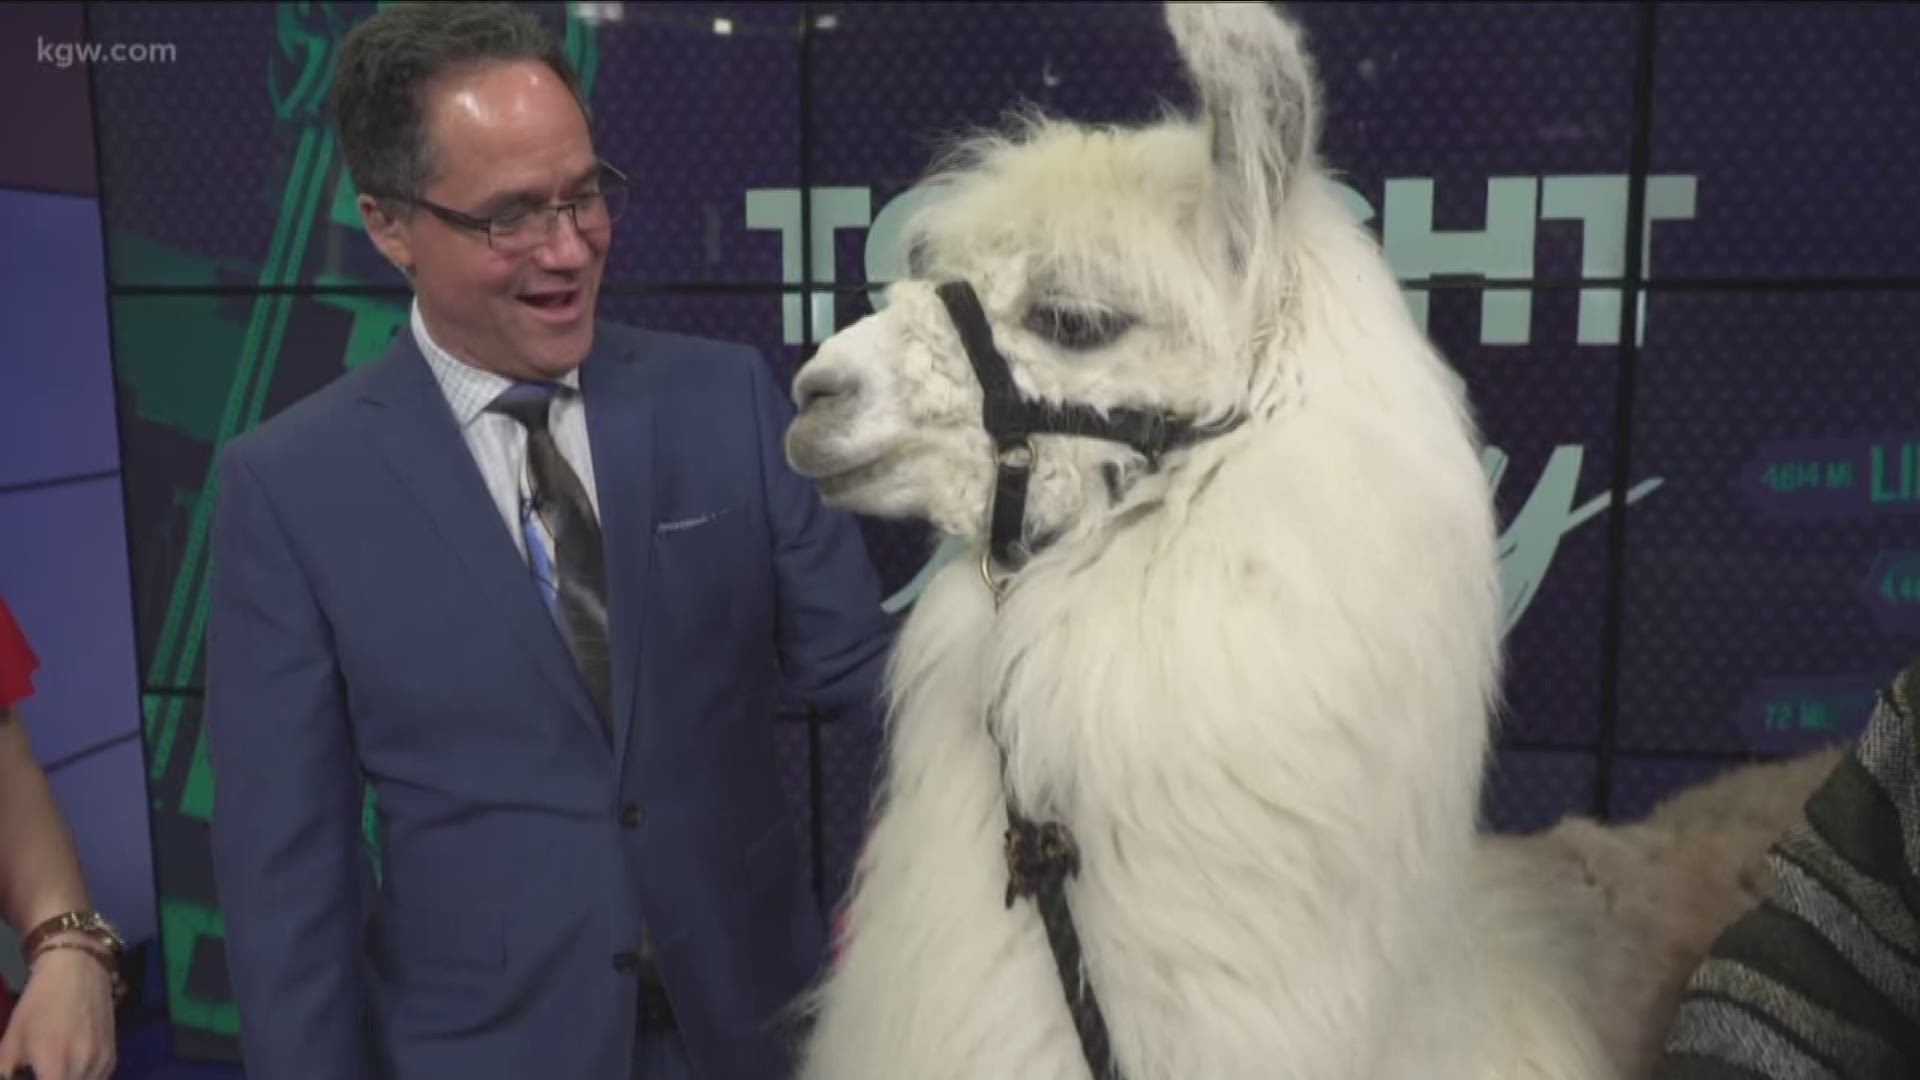 He's fluffy and a "Llamactivist." Caesar the No Drama Llama visited Tonight with Cassidy on National Love Your Pet Day.

facebook.com/thenodramallama
#TonightwithCassidy